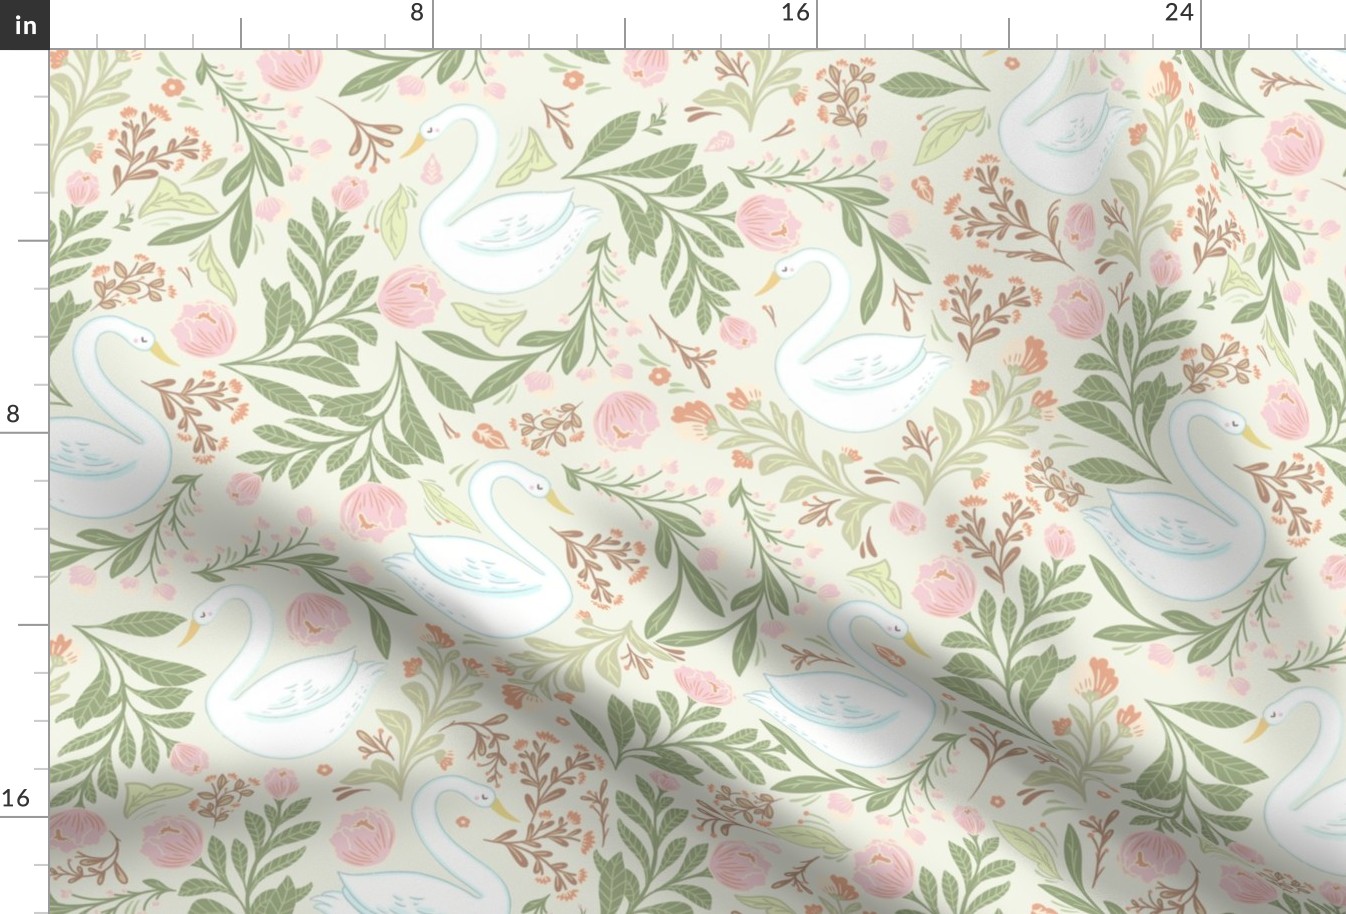 (M) Whimsical garden with Swans and pastel florals for Kids room wallpaper and decor